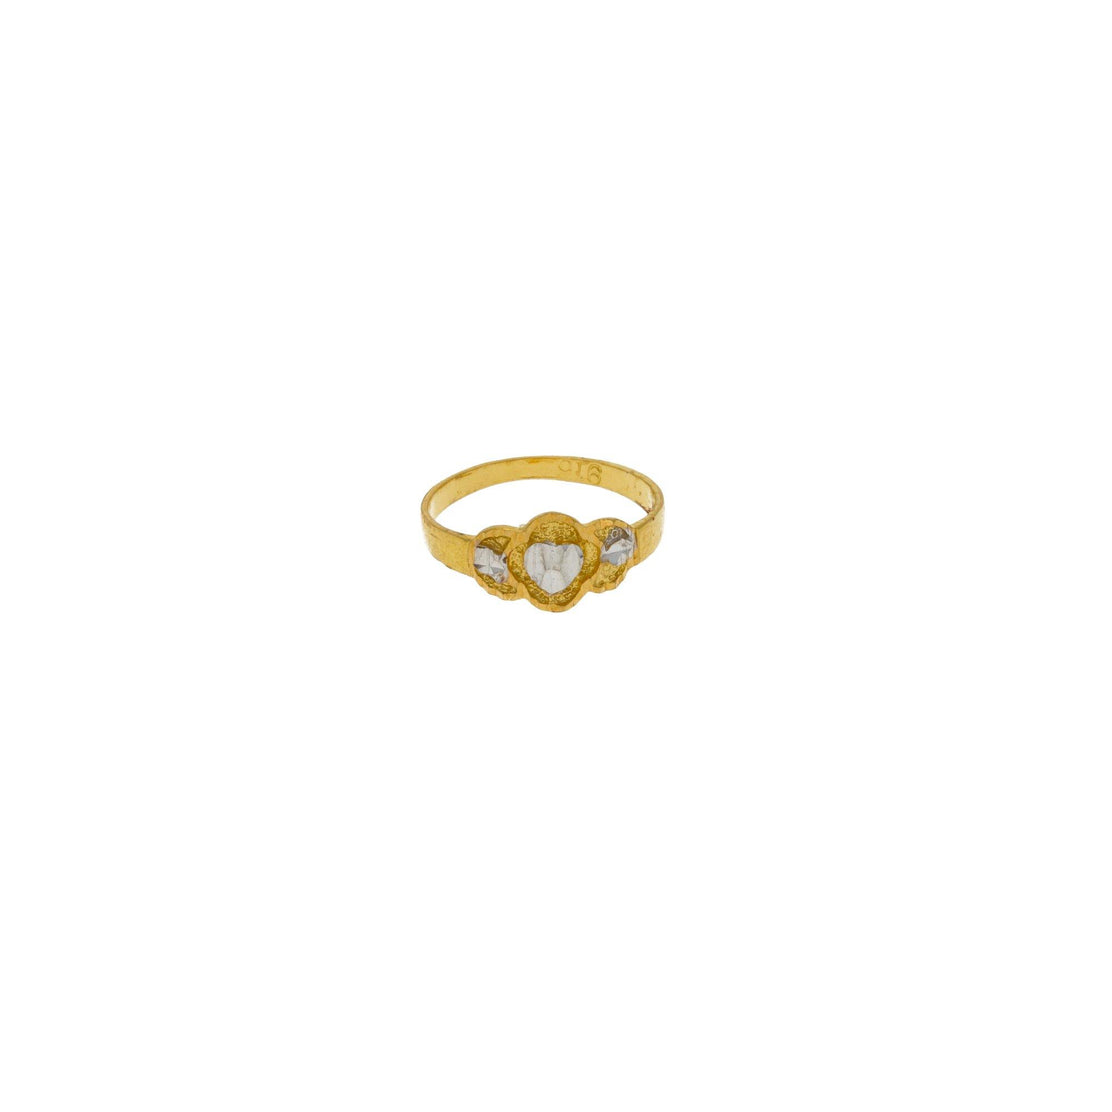 The Bountiful Leaf Gold Ring